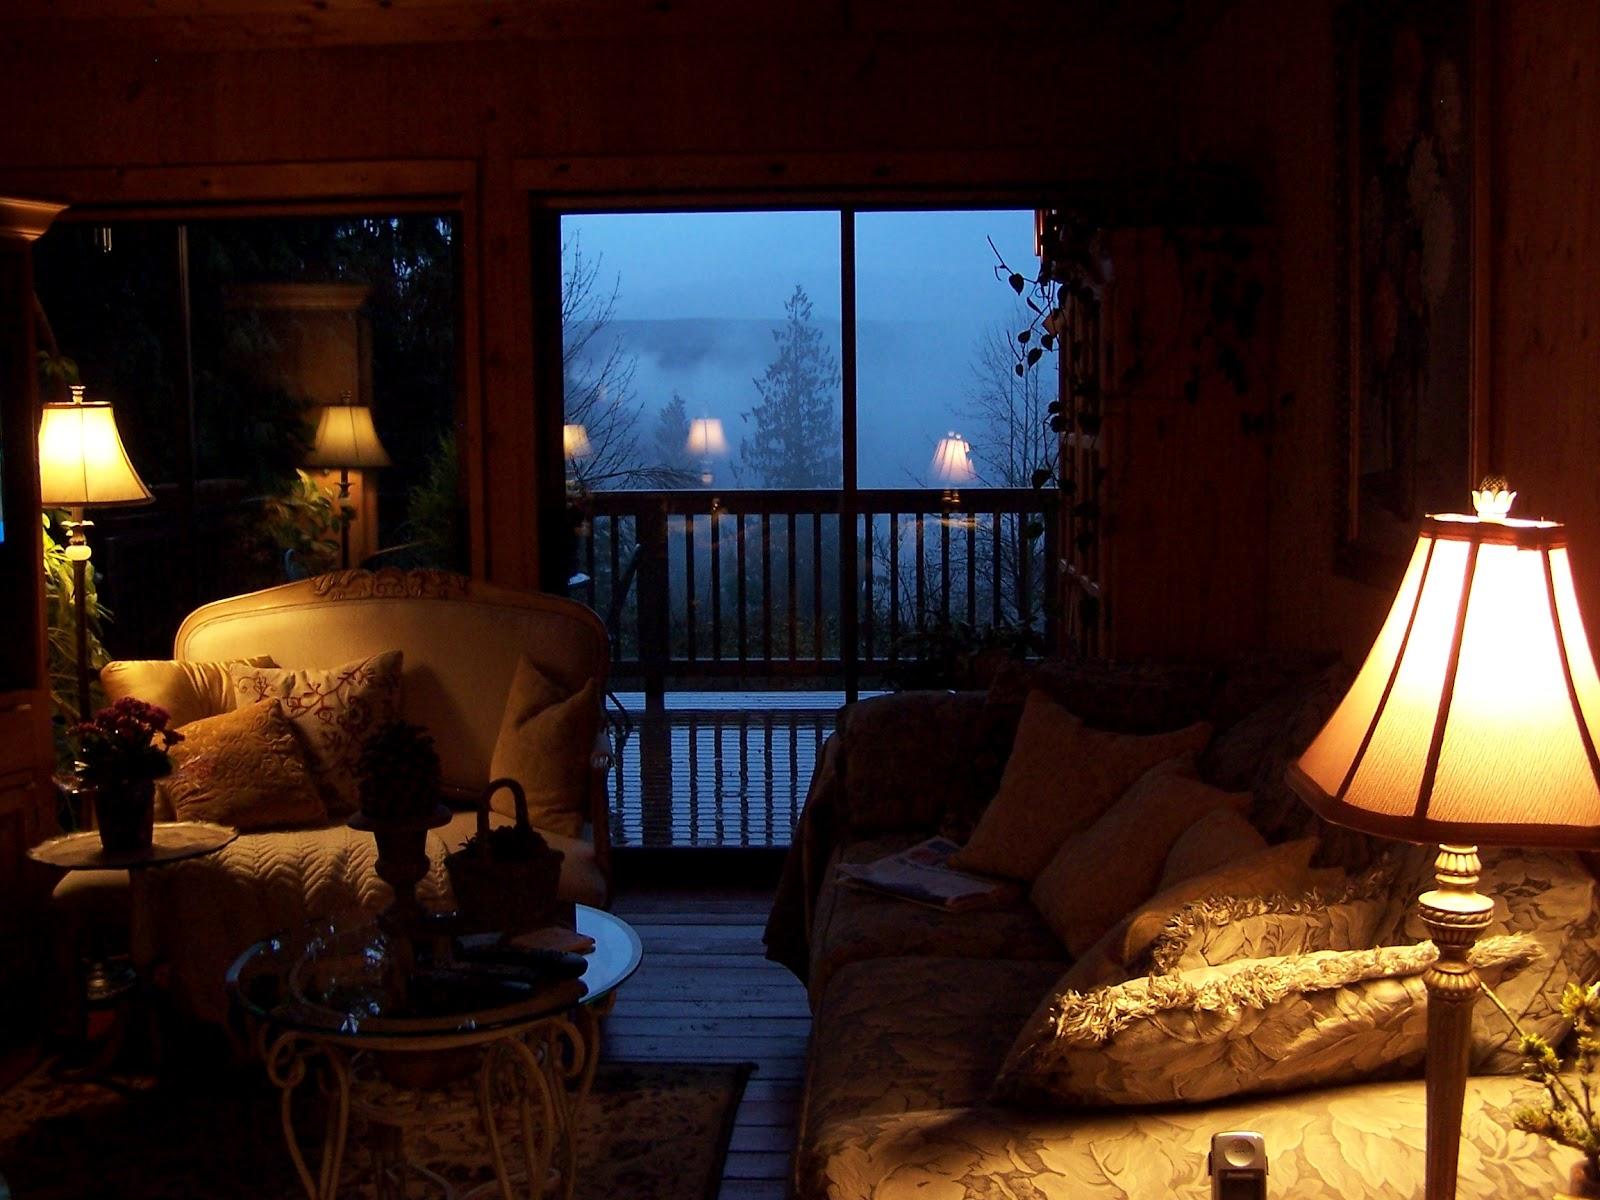 Cozy Rooms You'll Never Want To Leave!